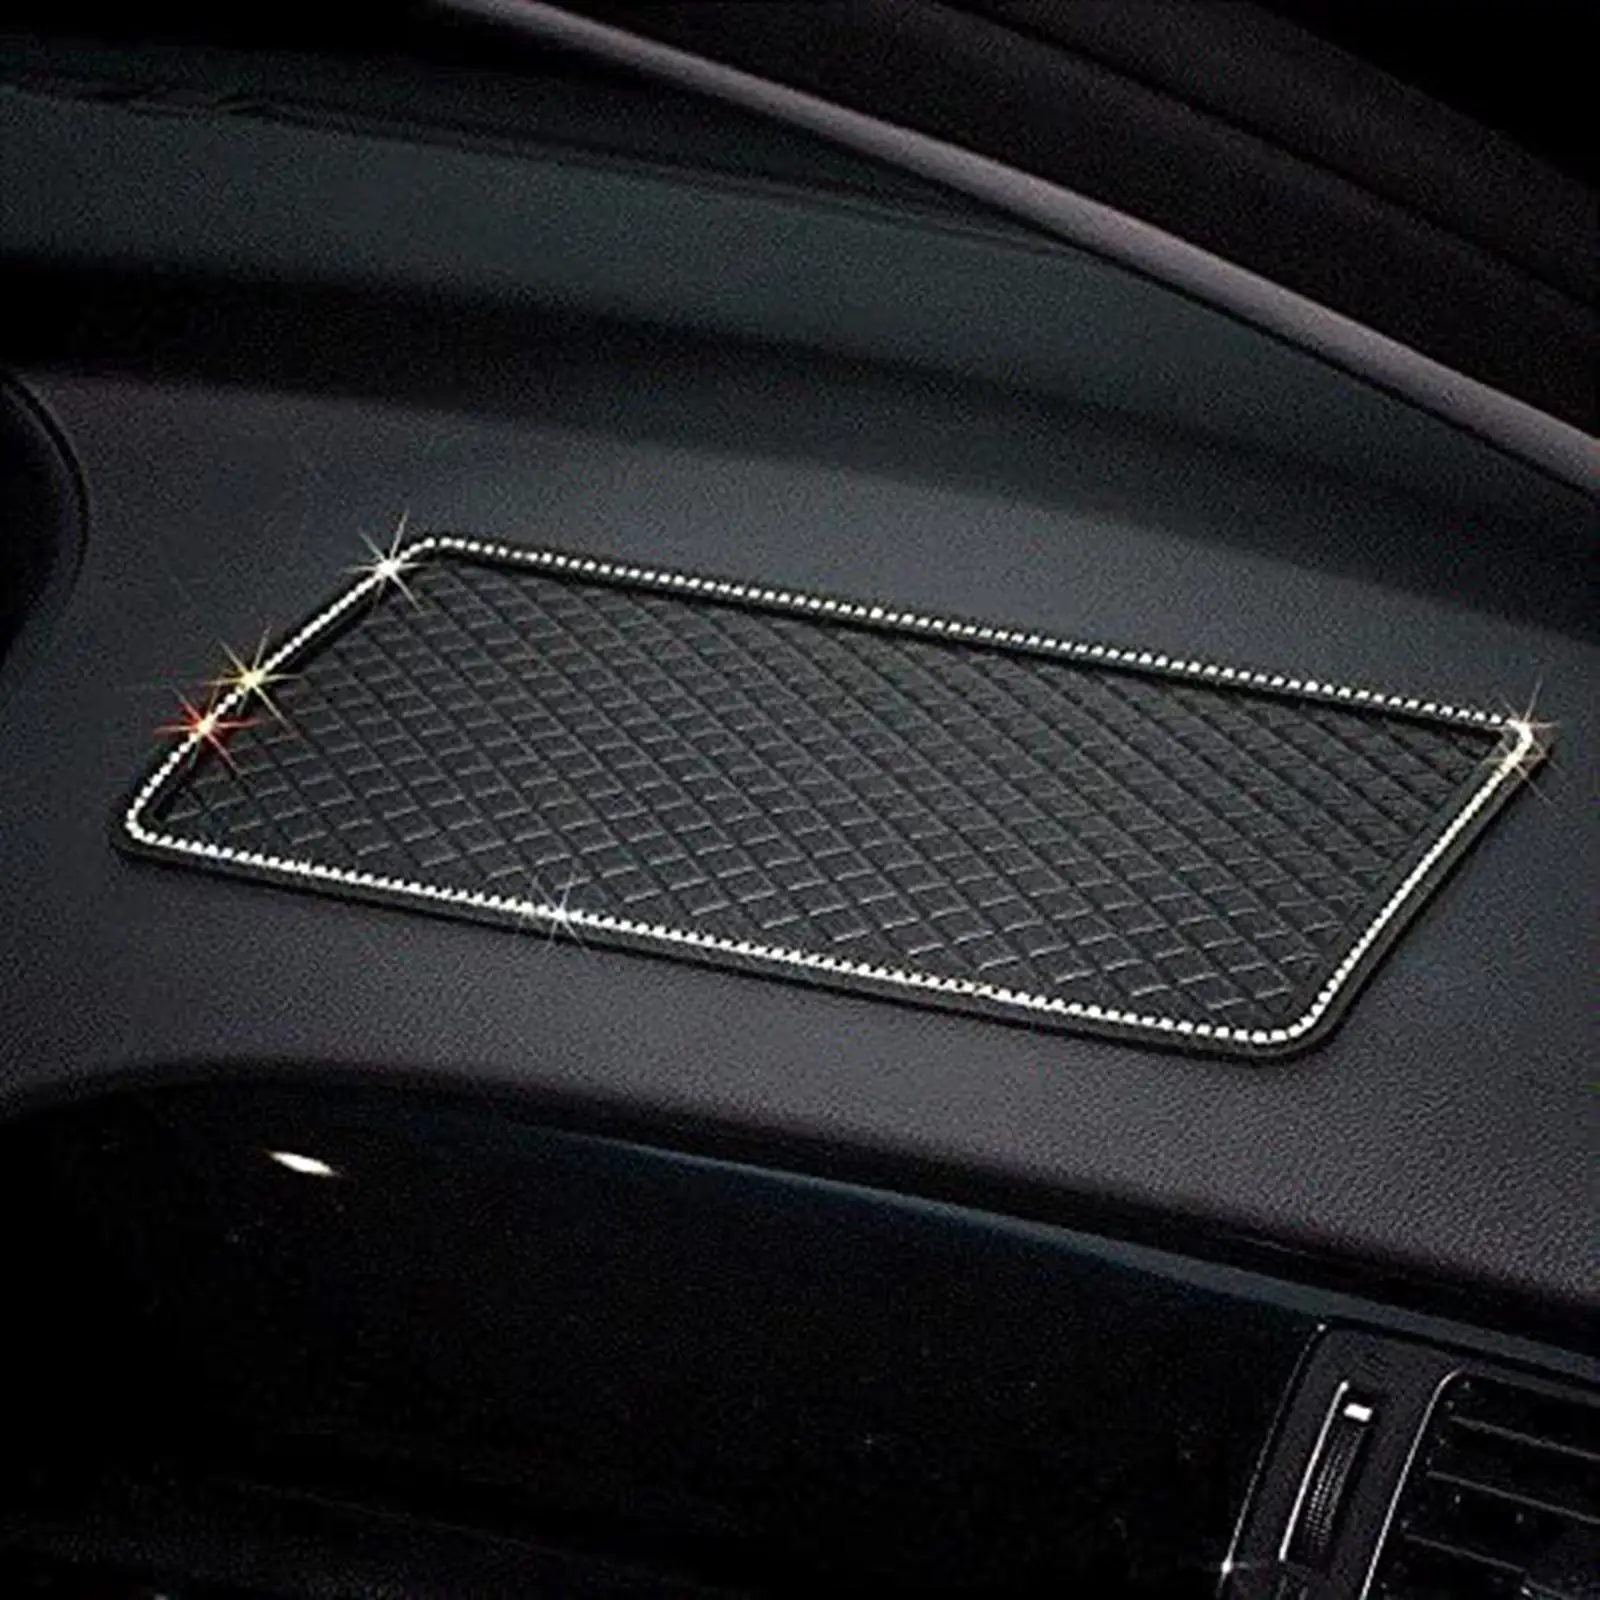 Car Anti Slip Sticky Dashboard Pad Heat Resistant Decoration for Phones